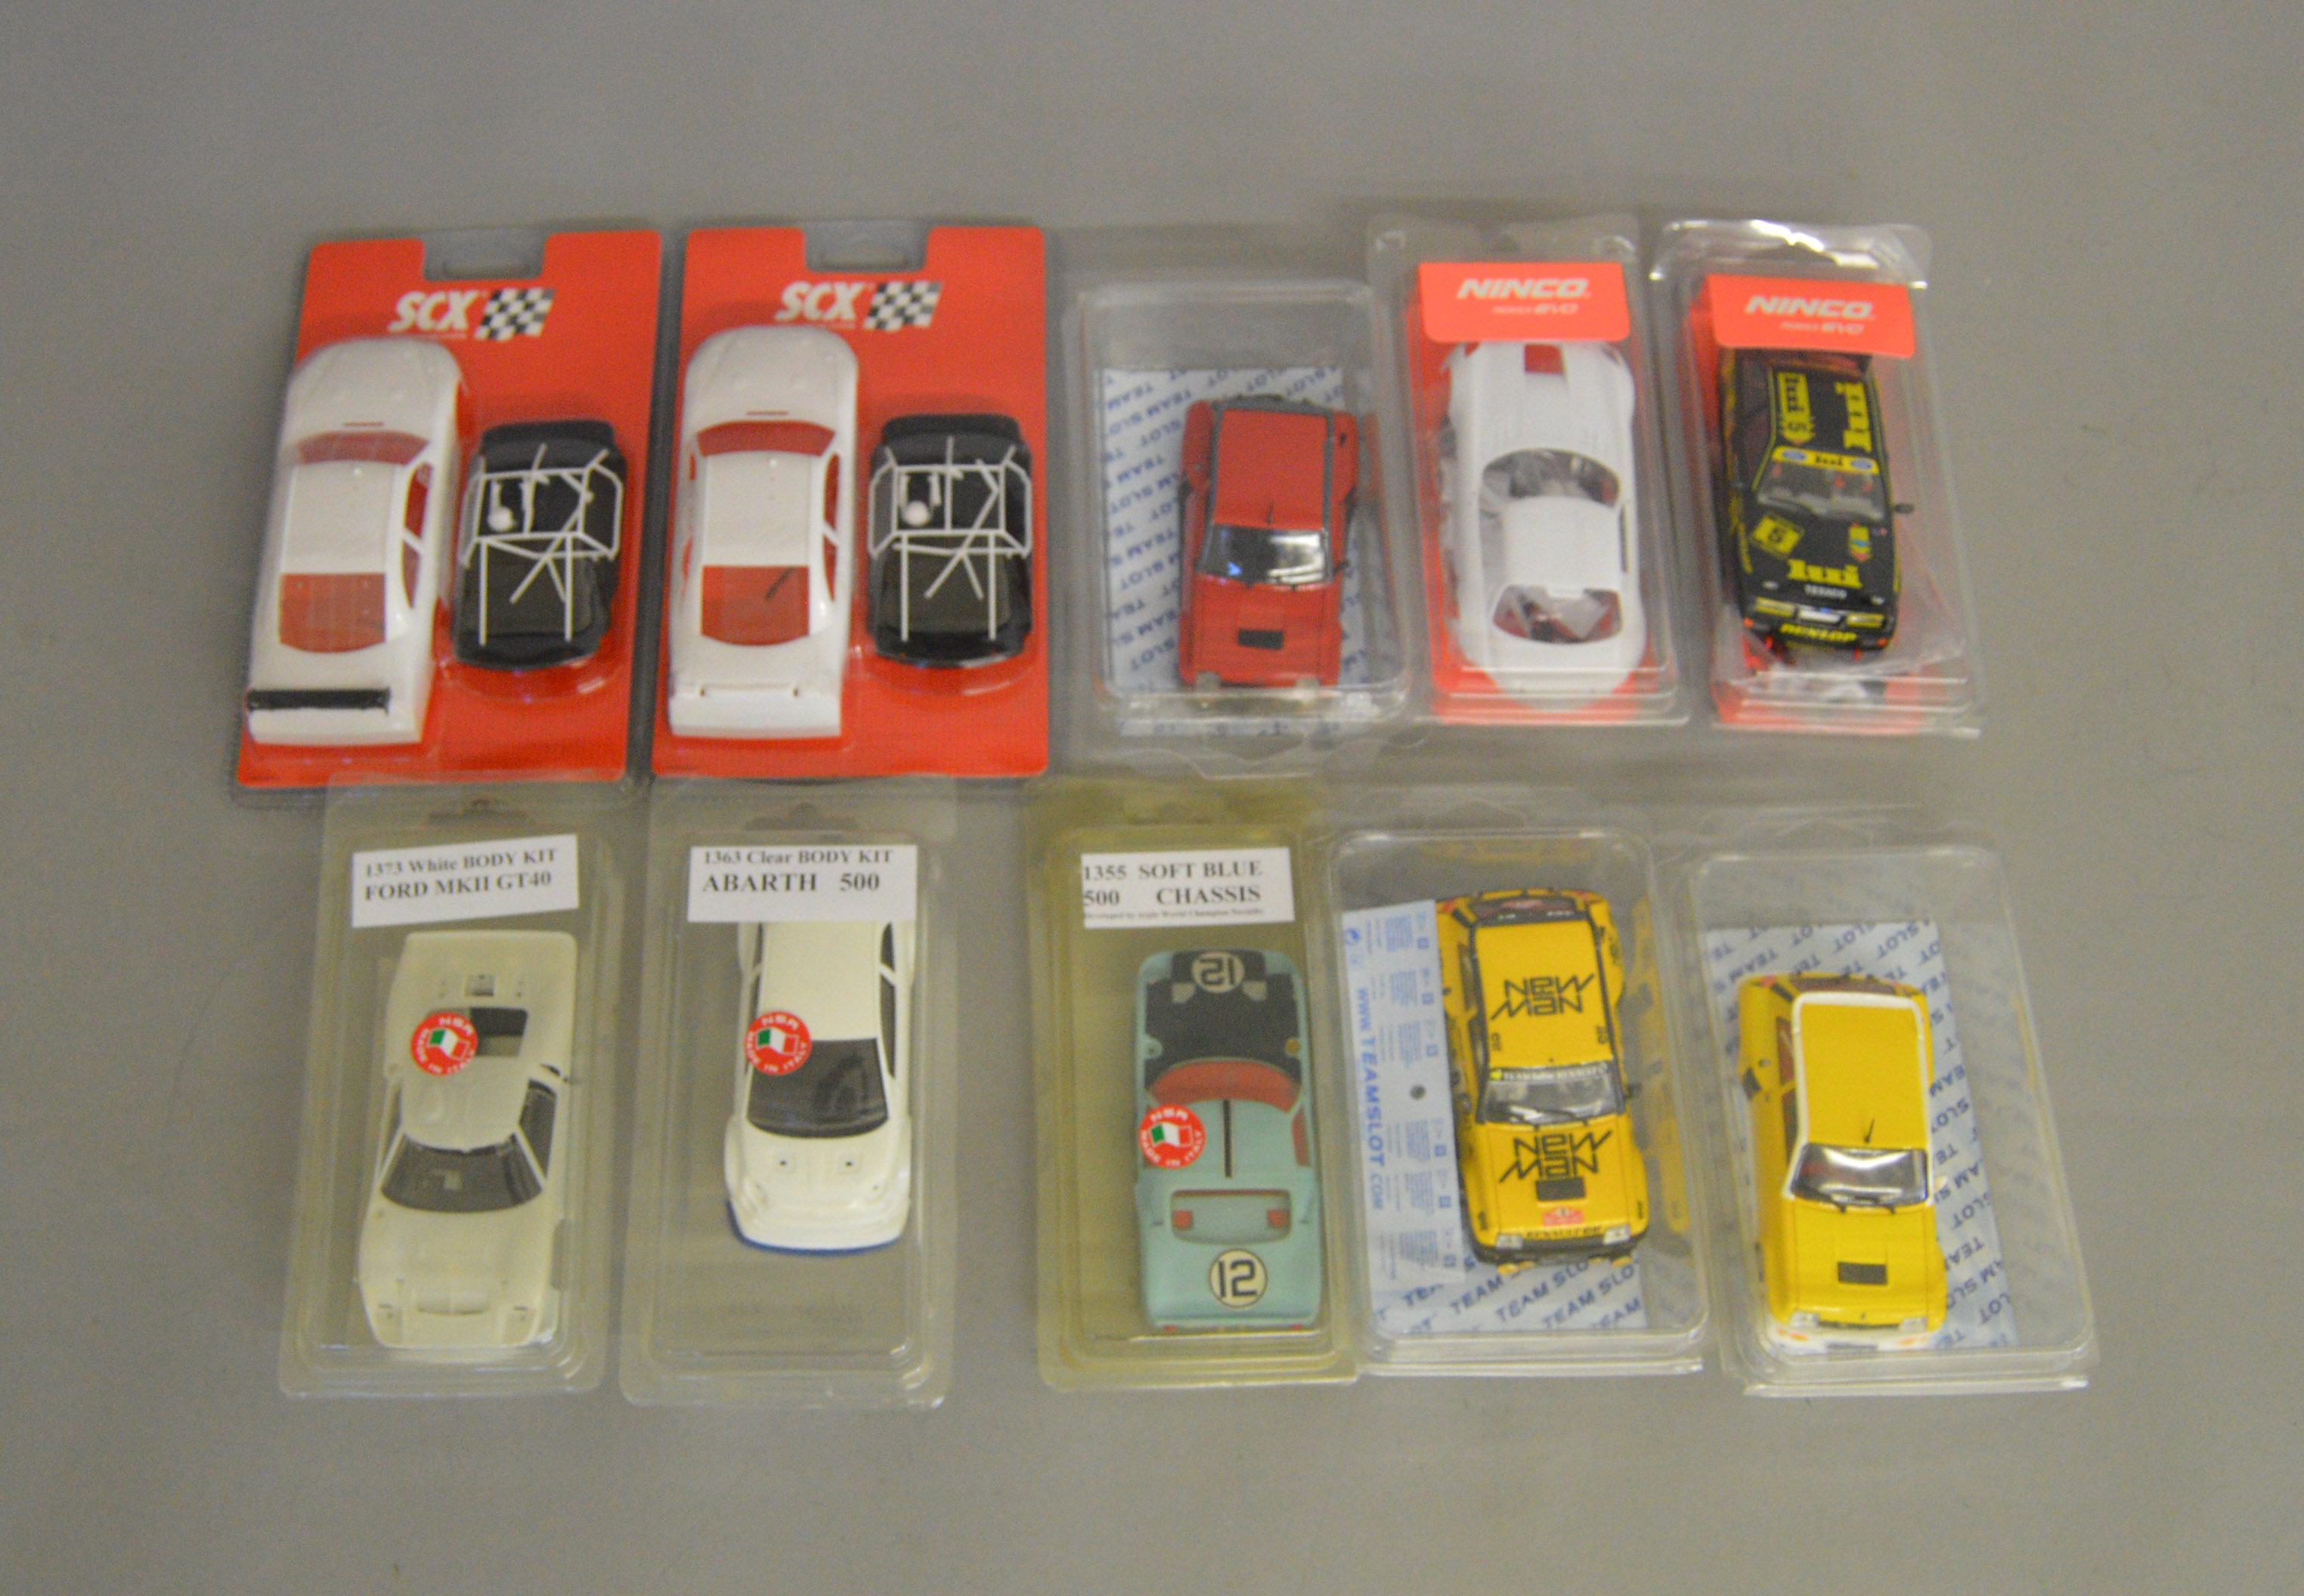 10 Slot Car Body Kits in original packaging including examples by SCX  Team Slot, Ninco etc. (10)